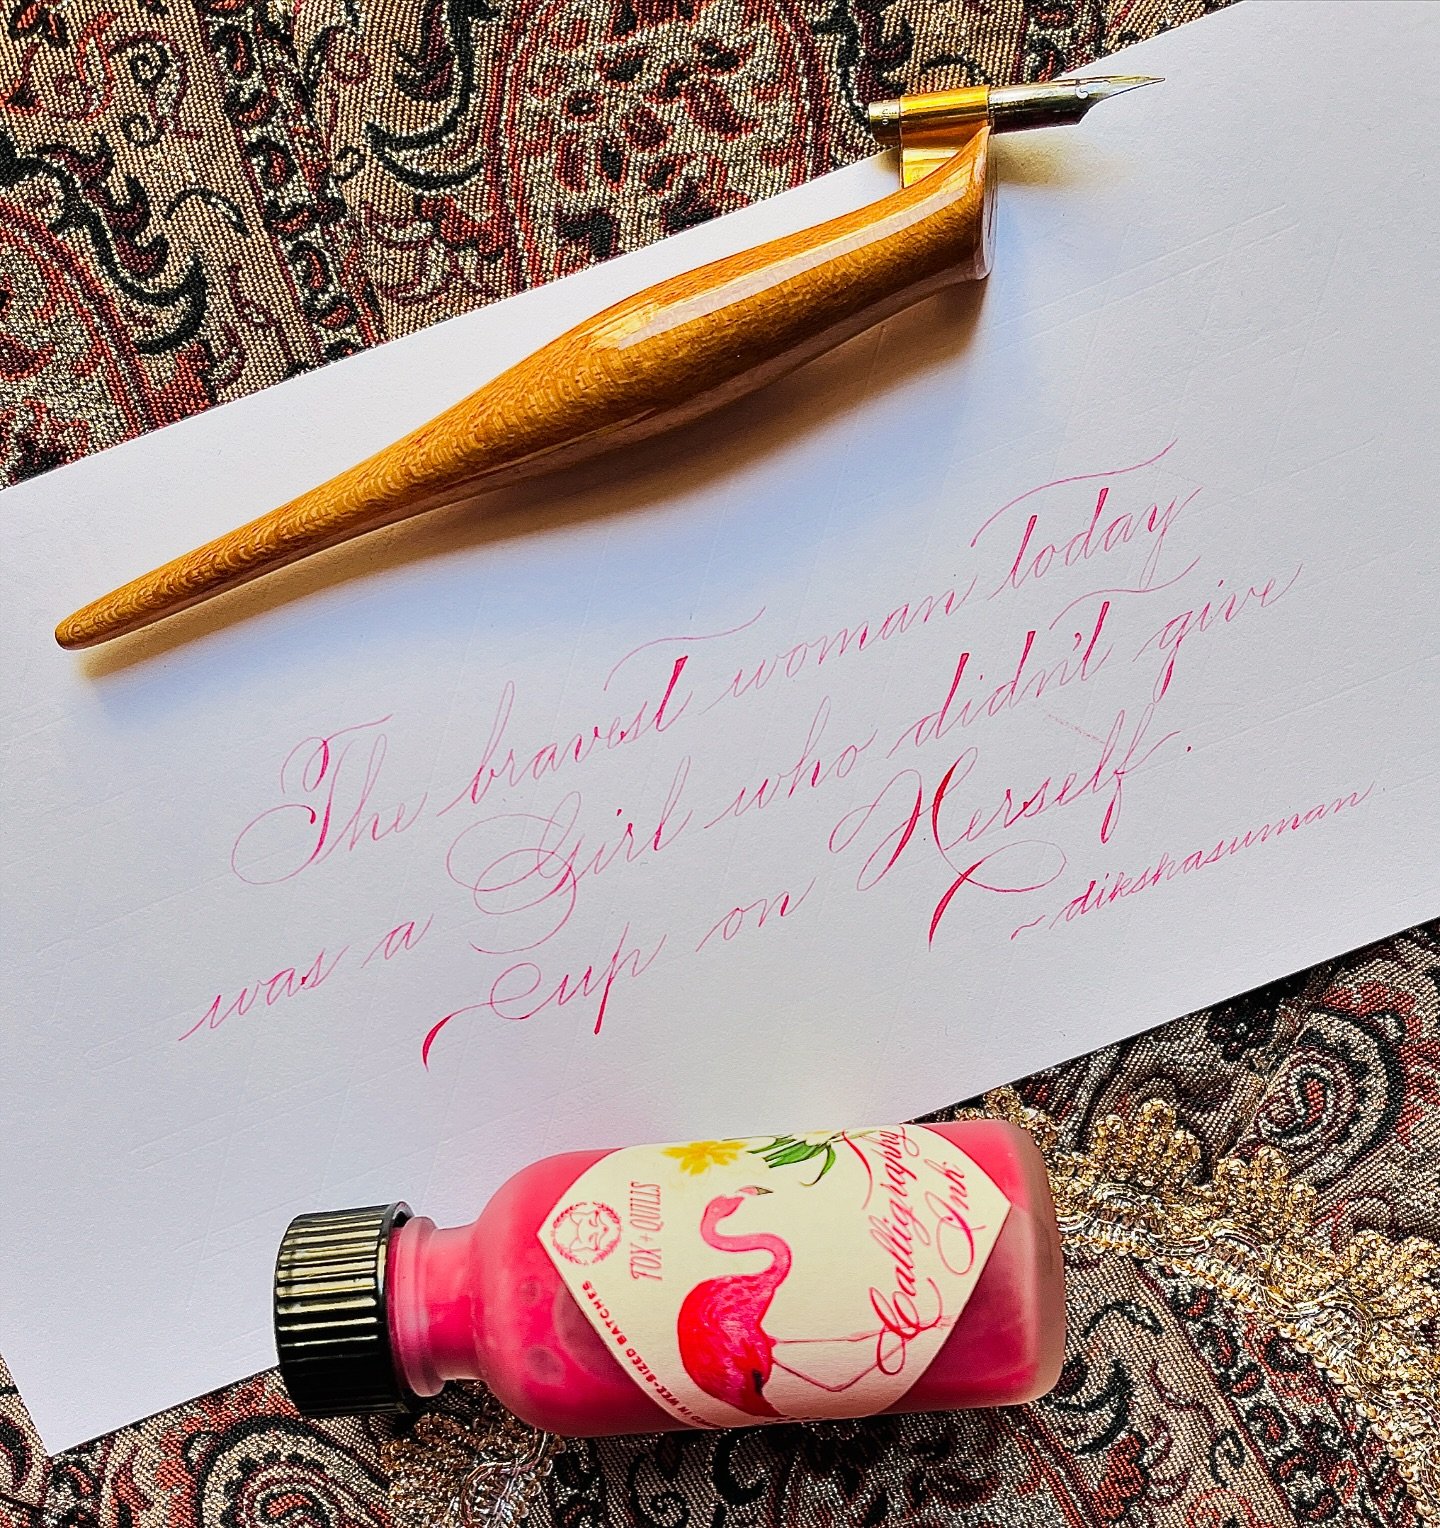 Written in Spencerian Script
Nib @manuscriptpenco LP EF 
Guideline Stencils @oriandcalli 
New Holder gifted by @ashcalligraphydesign - Thank you Ashok. It is a brilliant Holder and fits my small hands so well 😊💐💖
Ink @foxandquills Flamingo
.
#spen